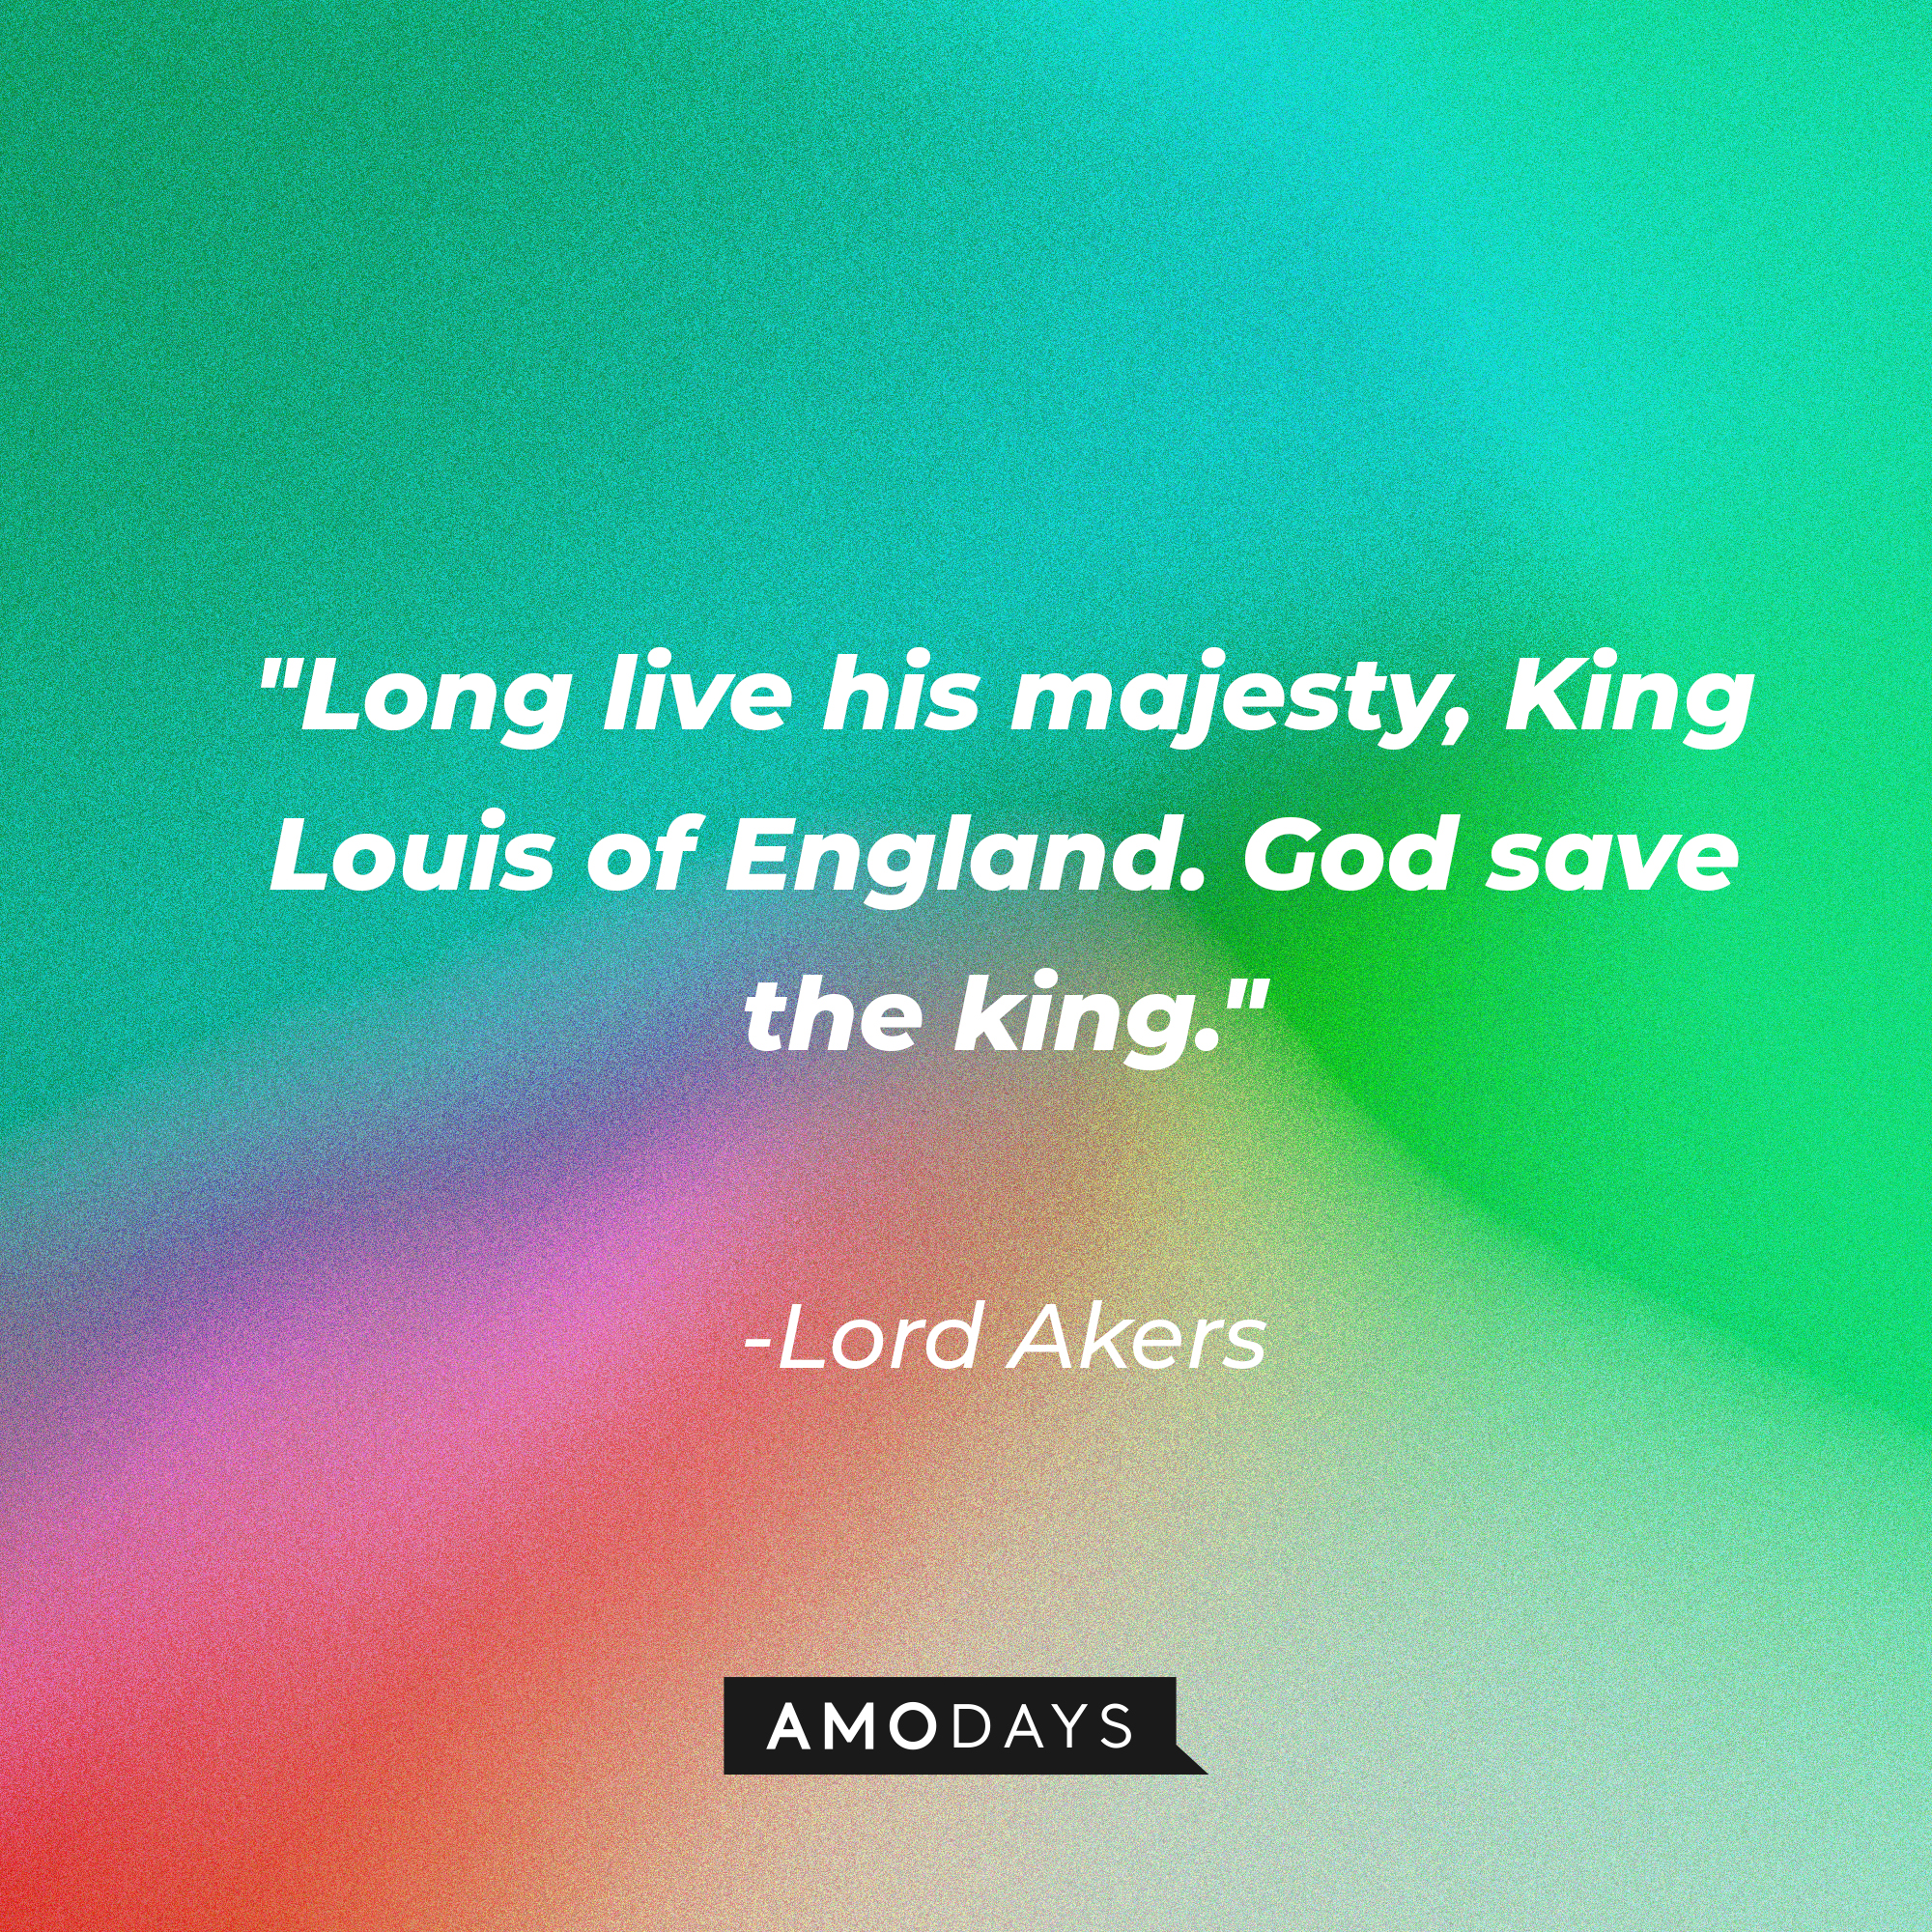 Lord Akers' quote in "Reign:" "Long live his majesty, King Louis of England. God save the king." | Source: Amodays